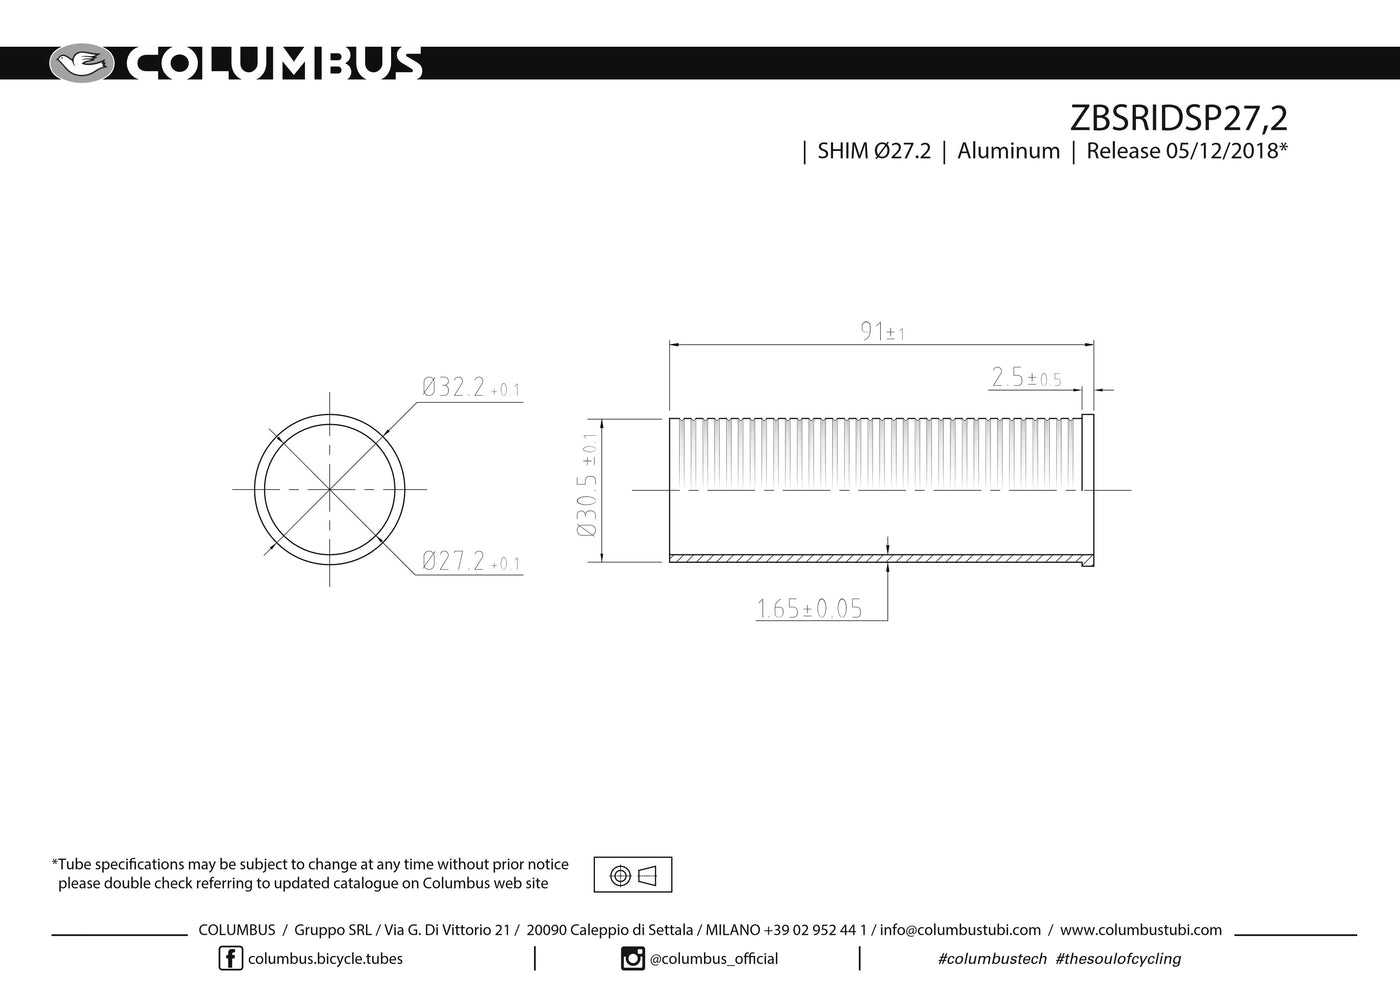 ZBSRIDSP27.2 - Columbus' aluminum reduction sleeve for reducing the inner diameter (30.2) of a 31.7 seat tube to 27.2.